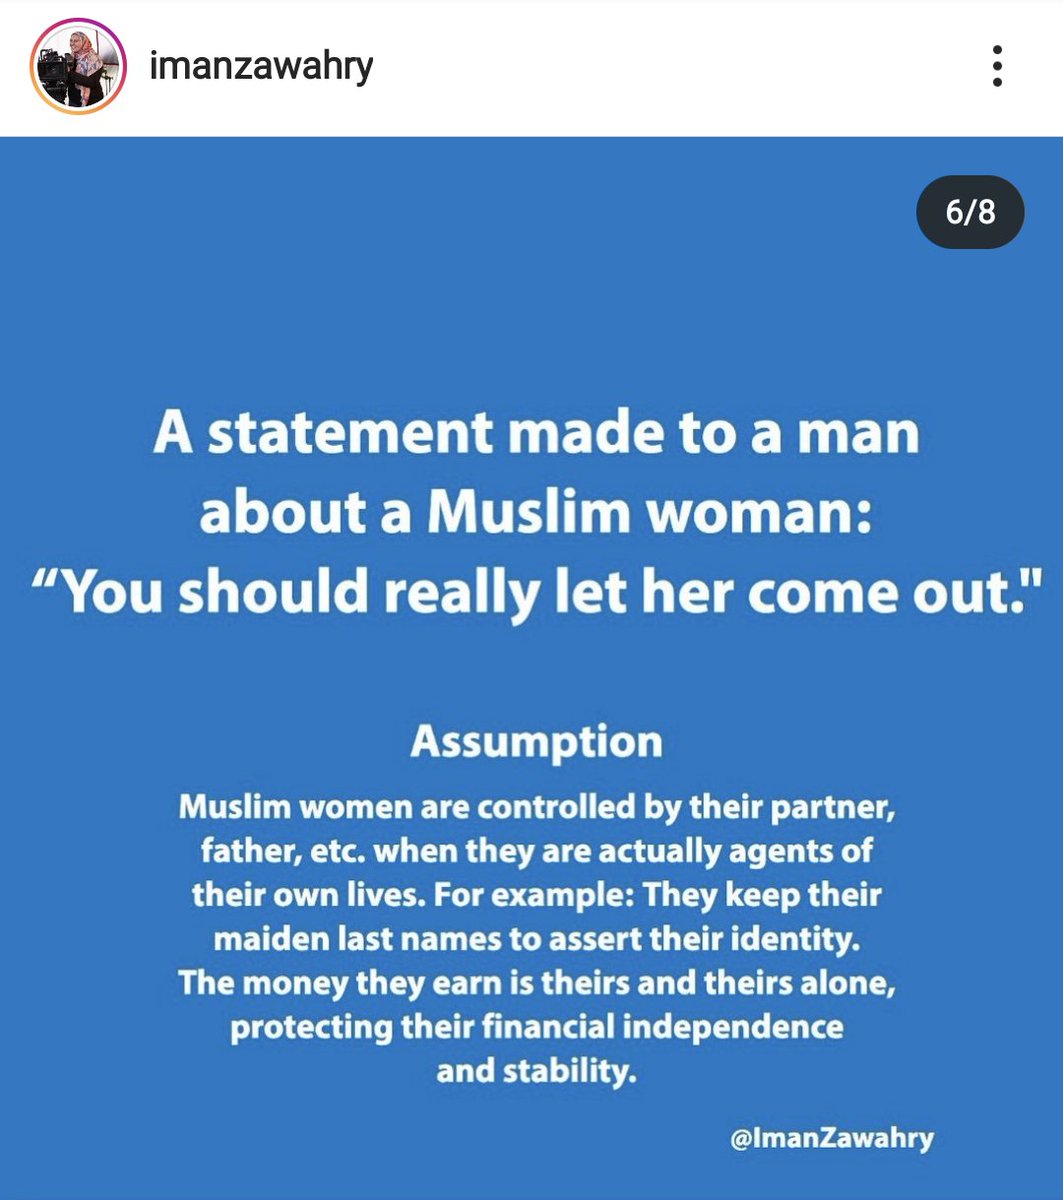 When people meet my husband, there's no assumption about who he is or where he's from. When they meet me with my husband, we then get labelled as the Muslim couple, the immigrants, the foreigners.